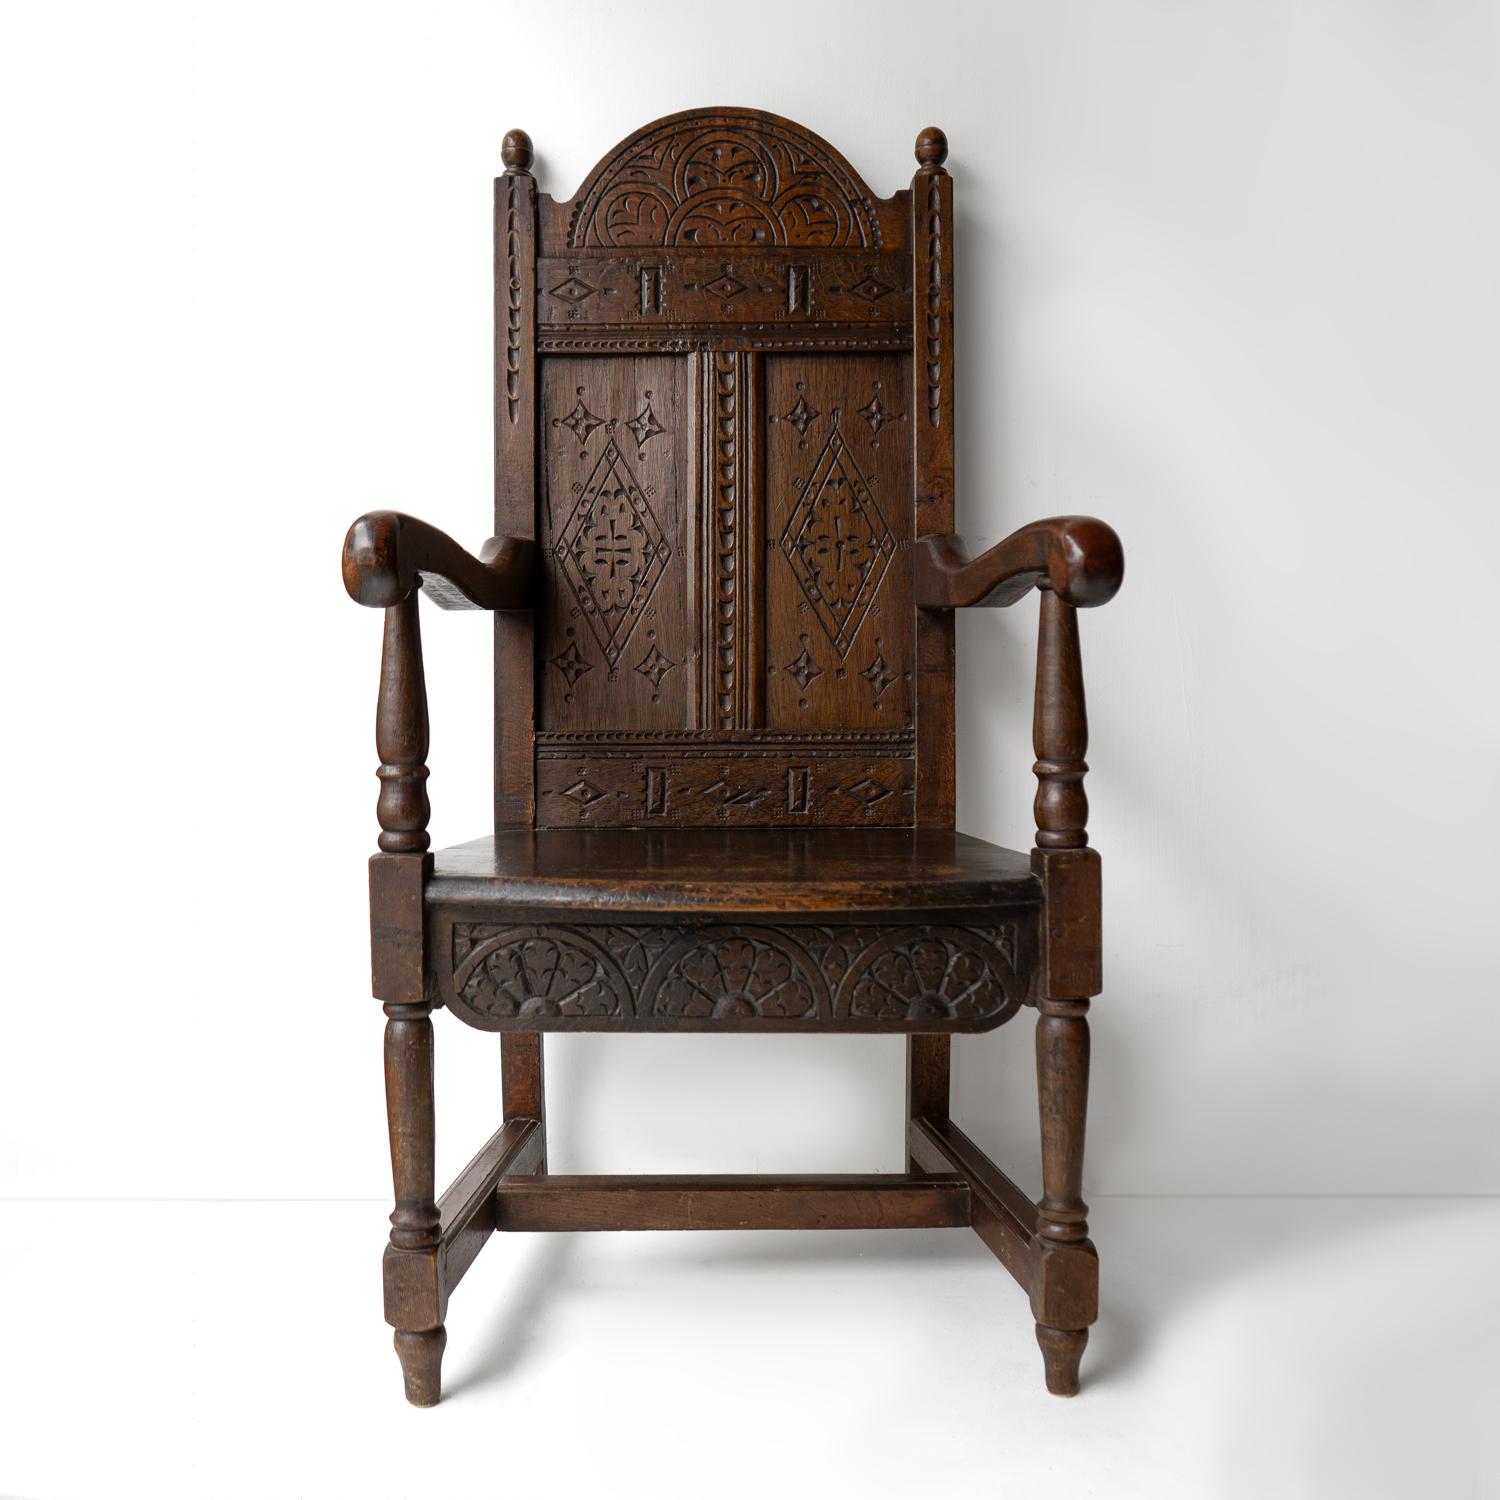 EARLY ENGLISH ANTIQUE CHAIR 
A generous-sized, handsome throne of chair which would grace all manner of interiors. 

An arched panel back with shaped arms, a solid seat with turned front legs and square back legs united by an ‘H’ frame